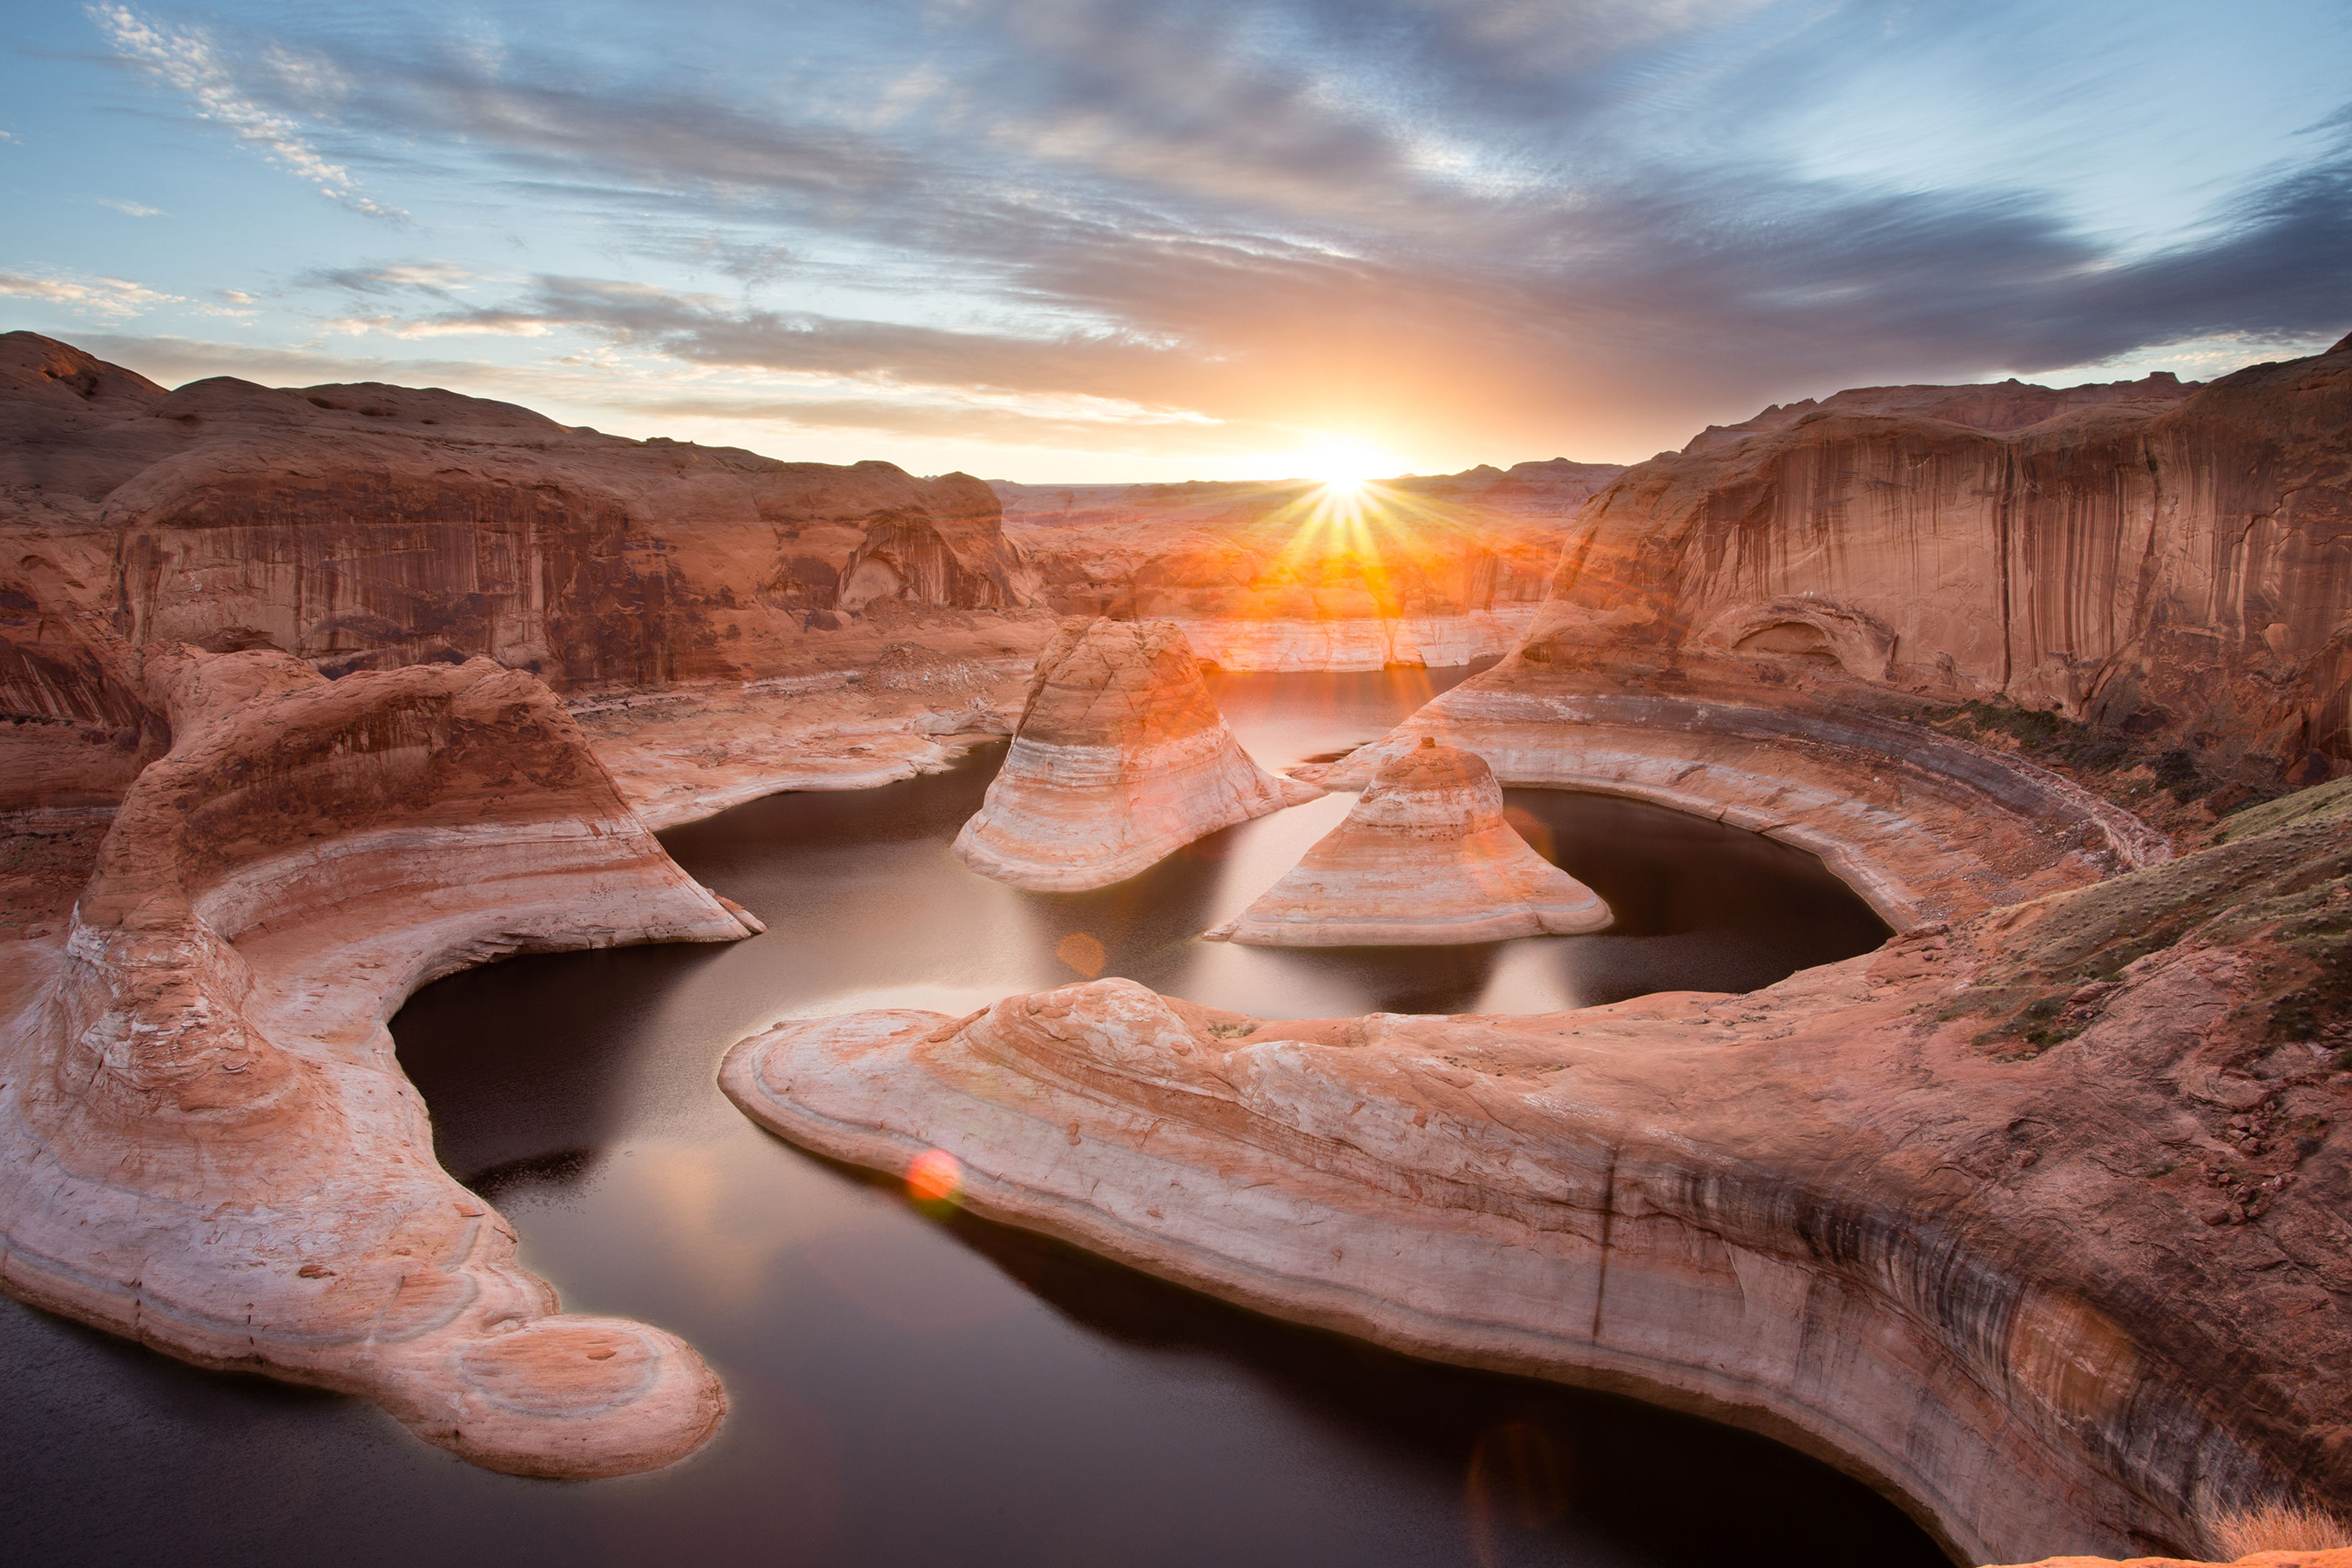 Glen Canyon National Recreation Area, Yang Lu, Share the Experience 2015 photo contest